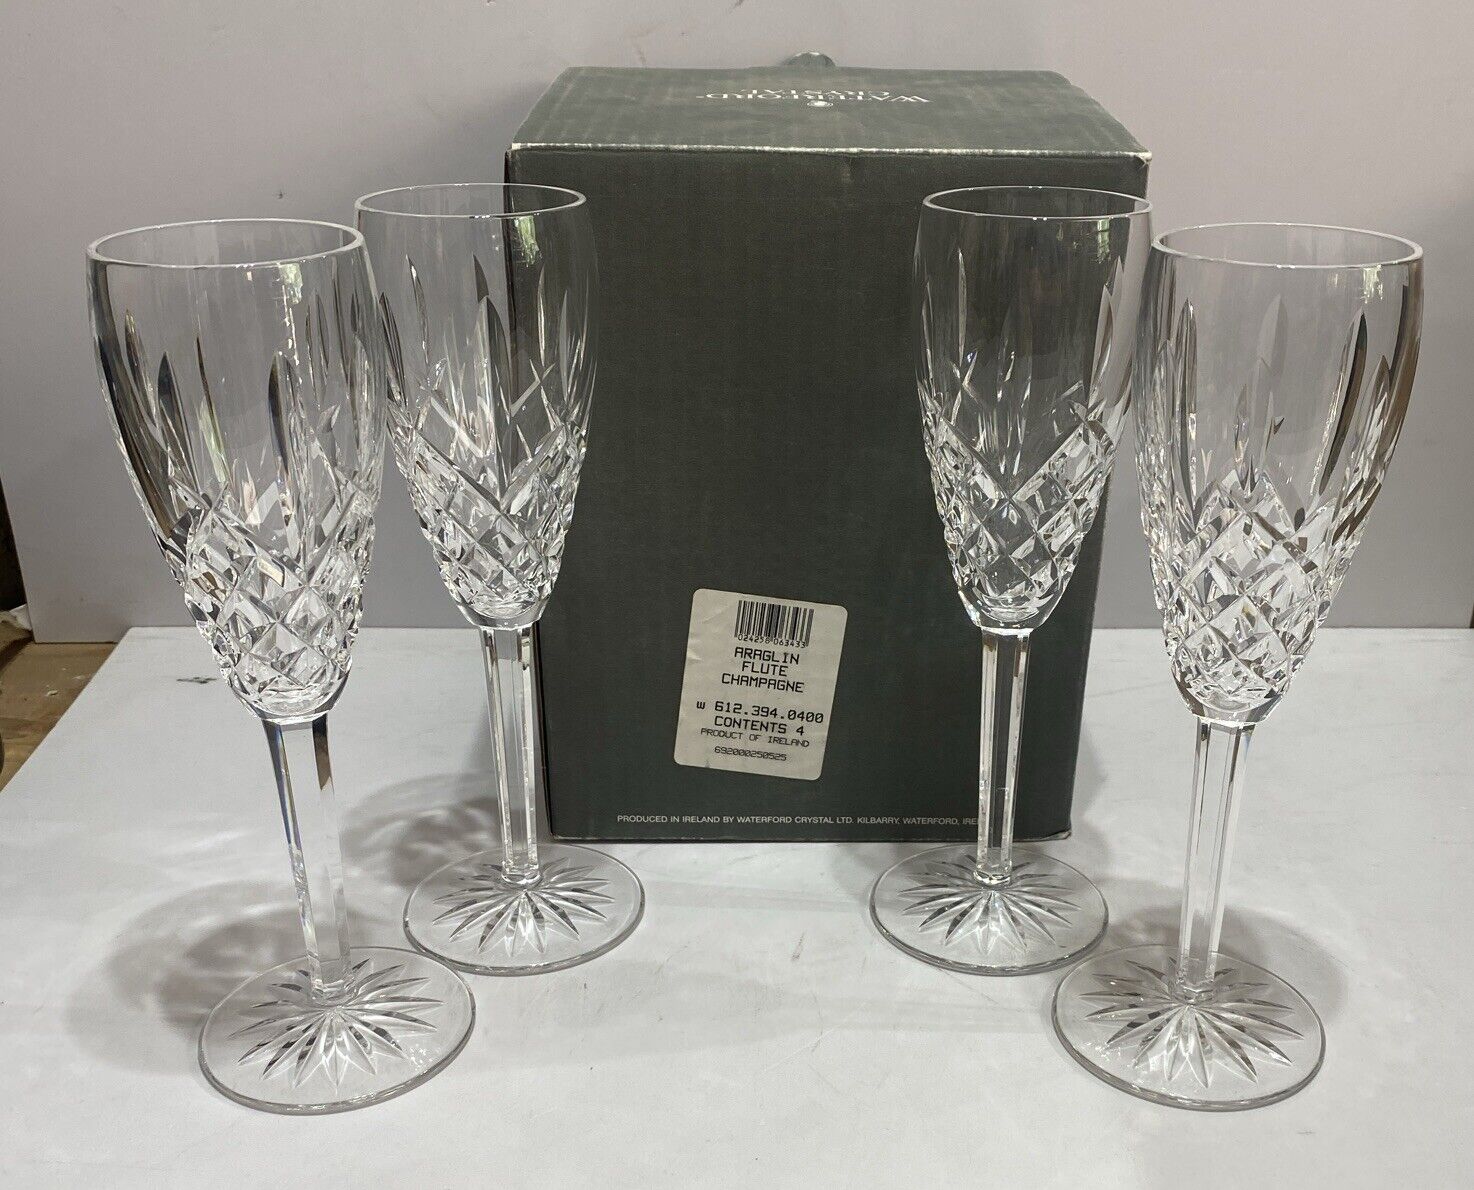 Vintage WATERFORD ARAGLIN FLUTE CHAMPAGNE Crystal Glasses 8.5” Set Of 4 With Box